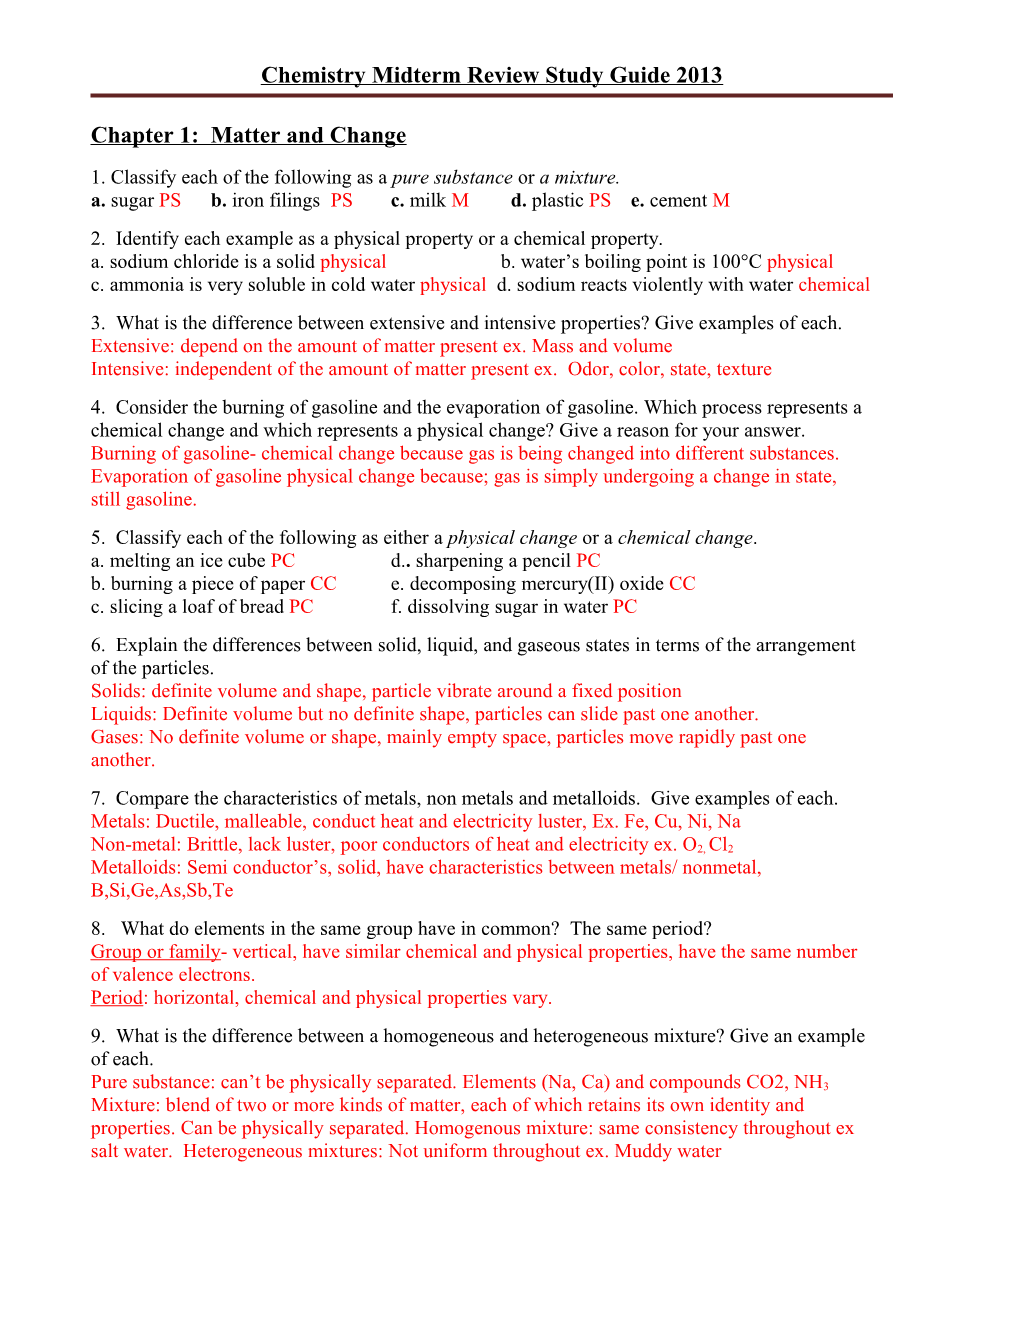 Chemistry Midterm Review Study Guide 2012